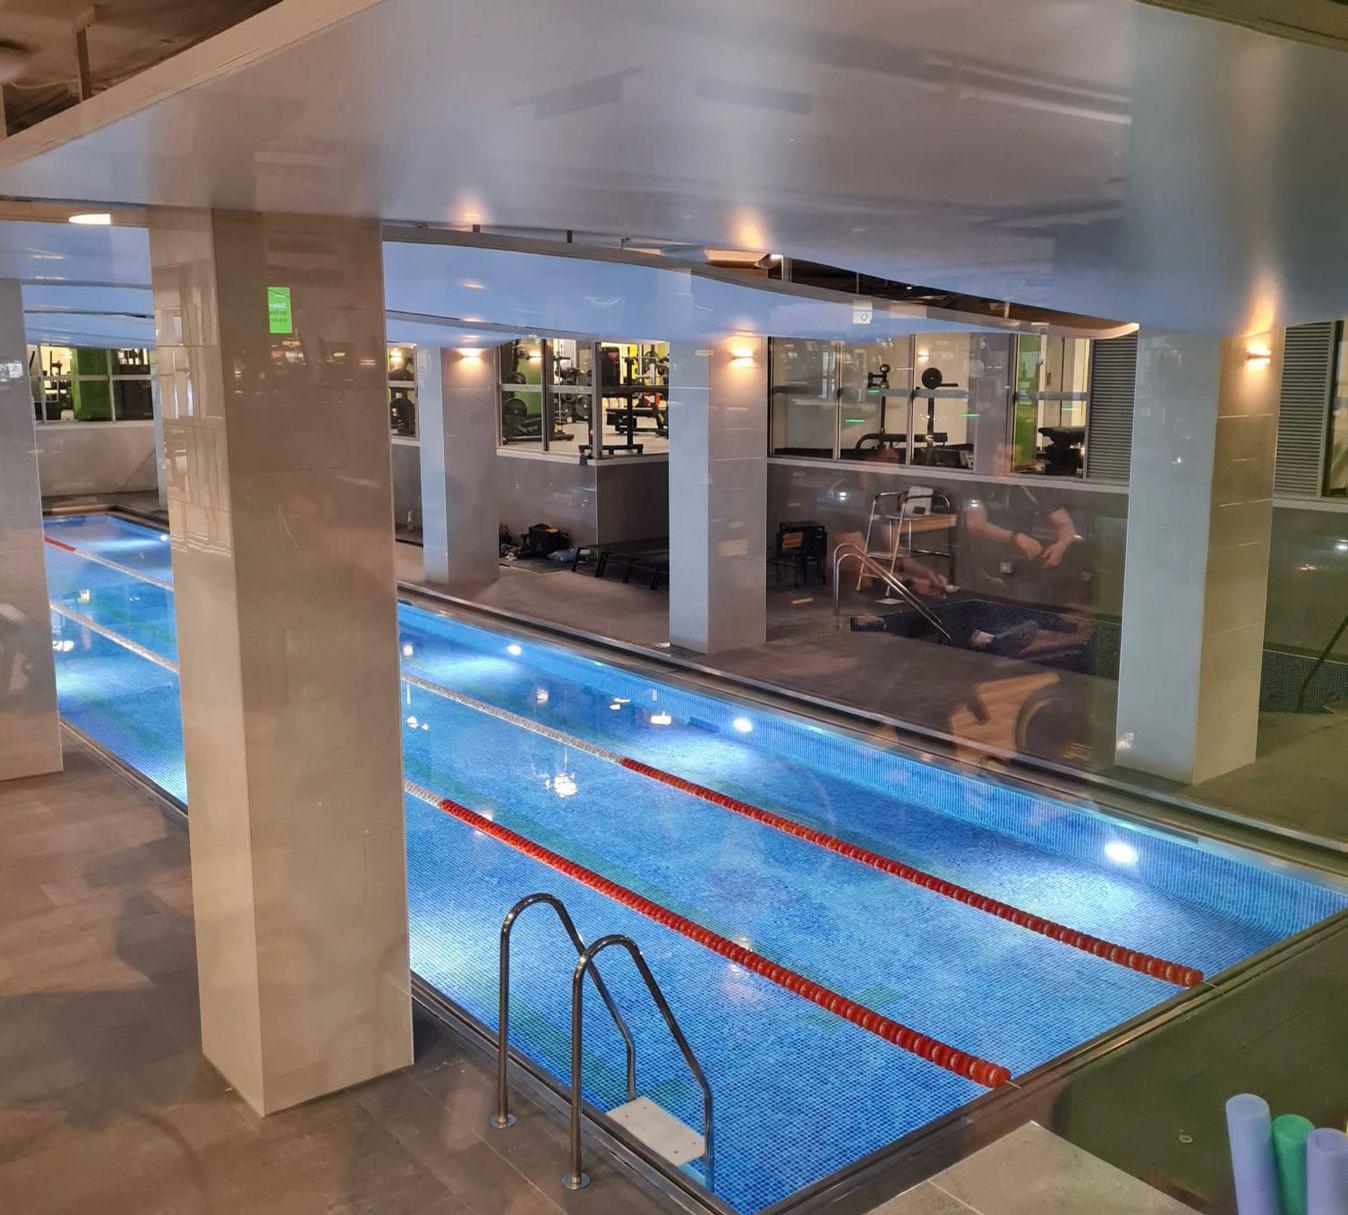 The Barbican club's iconic indoor pool has been refurbished / Nuffield 